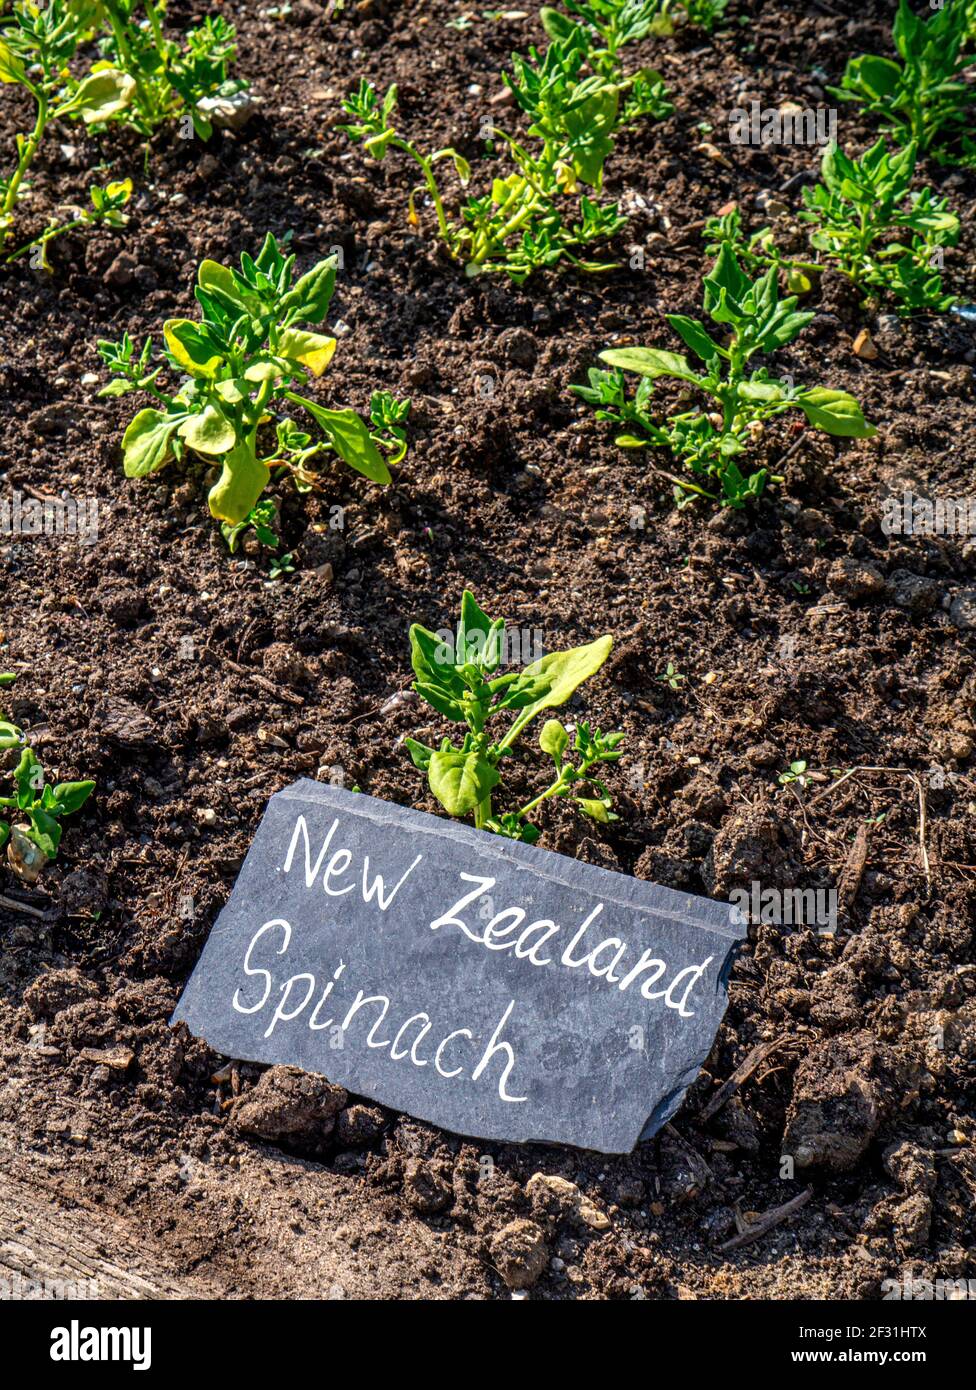 New Zealand spinach in Kitchen Garden 'Tetragonia tetragonoide' is a flowering plant in the fig-marigold family cultivated as a leafy vegetable. Stock Photo